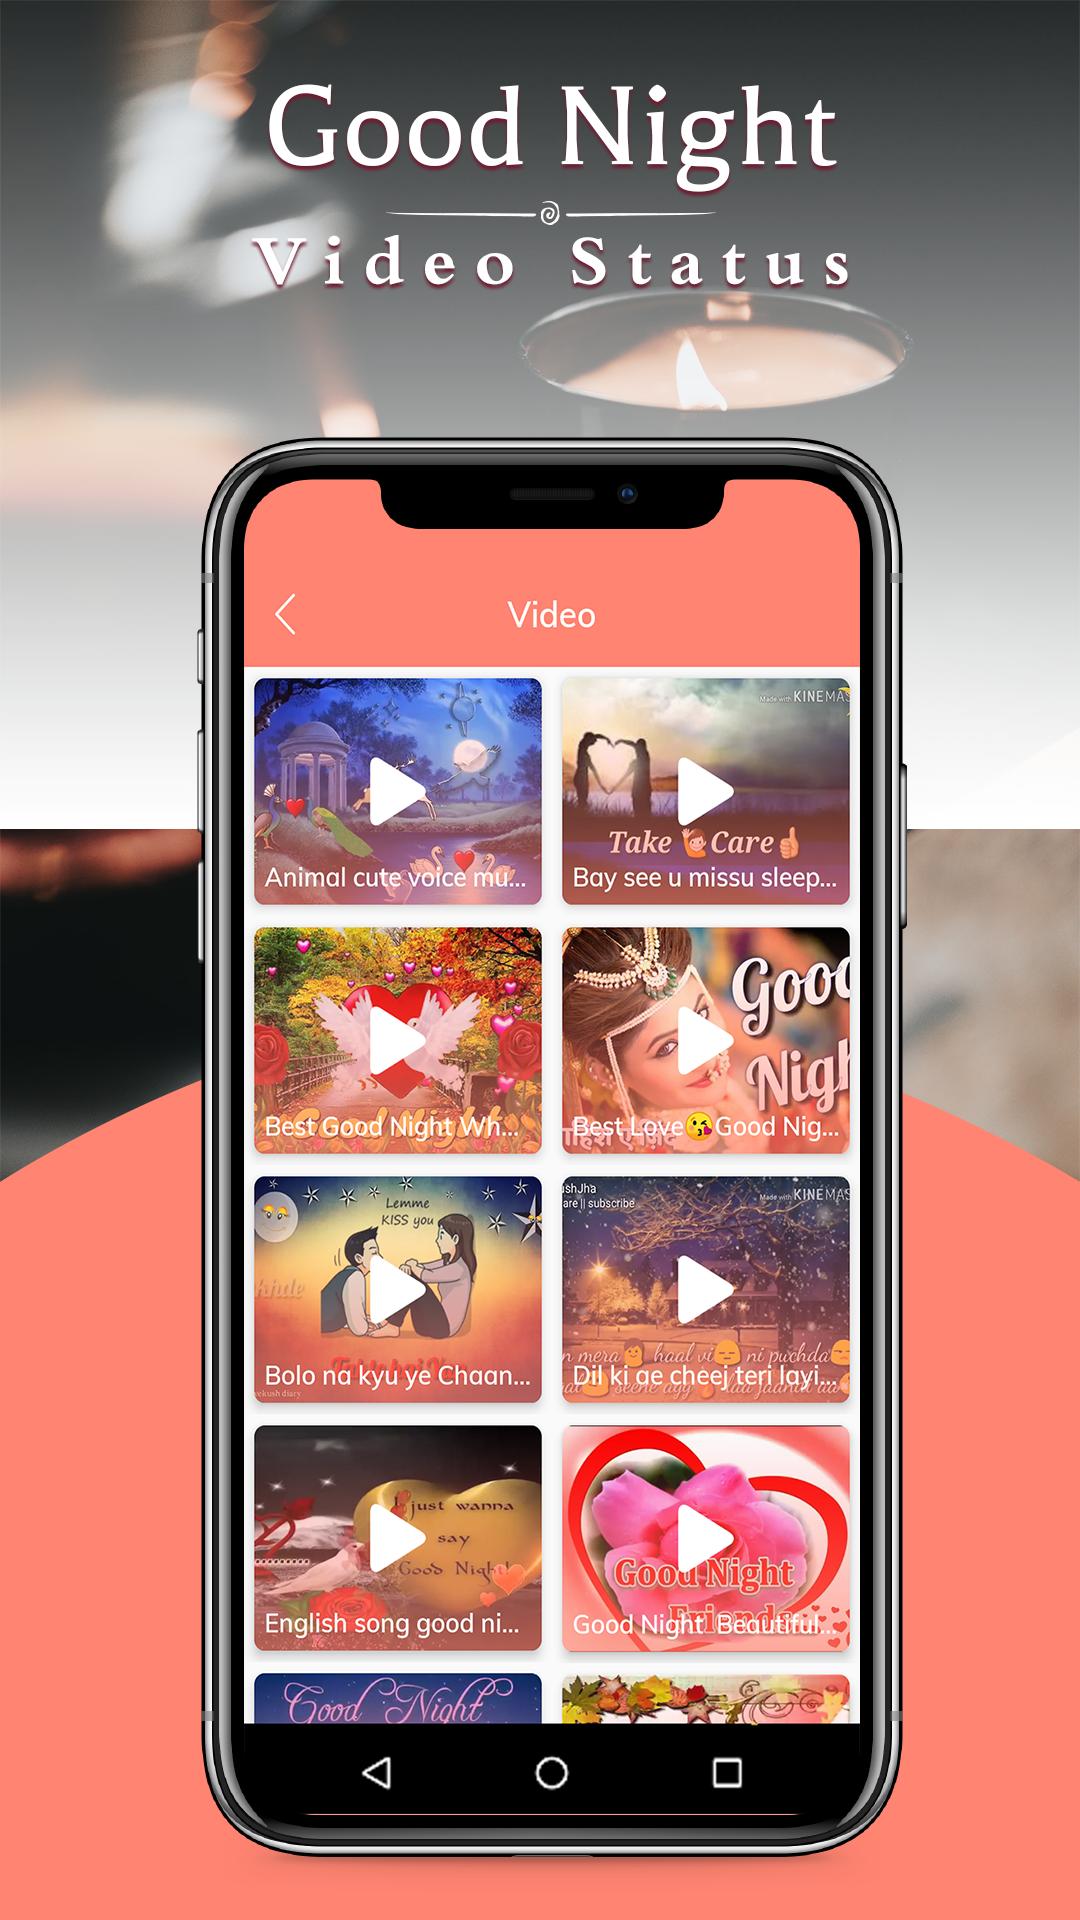 Good Night Full Screen Video Status For Android Apk Download